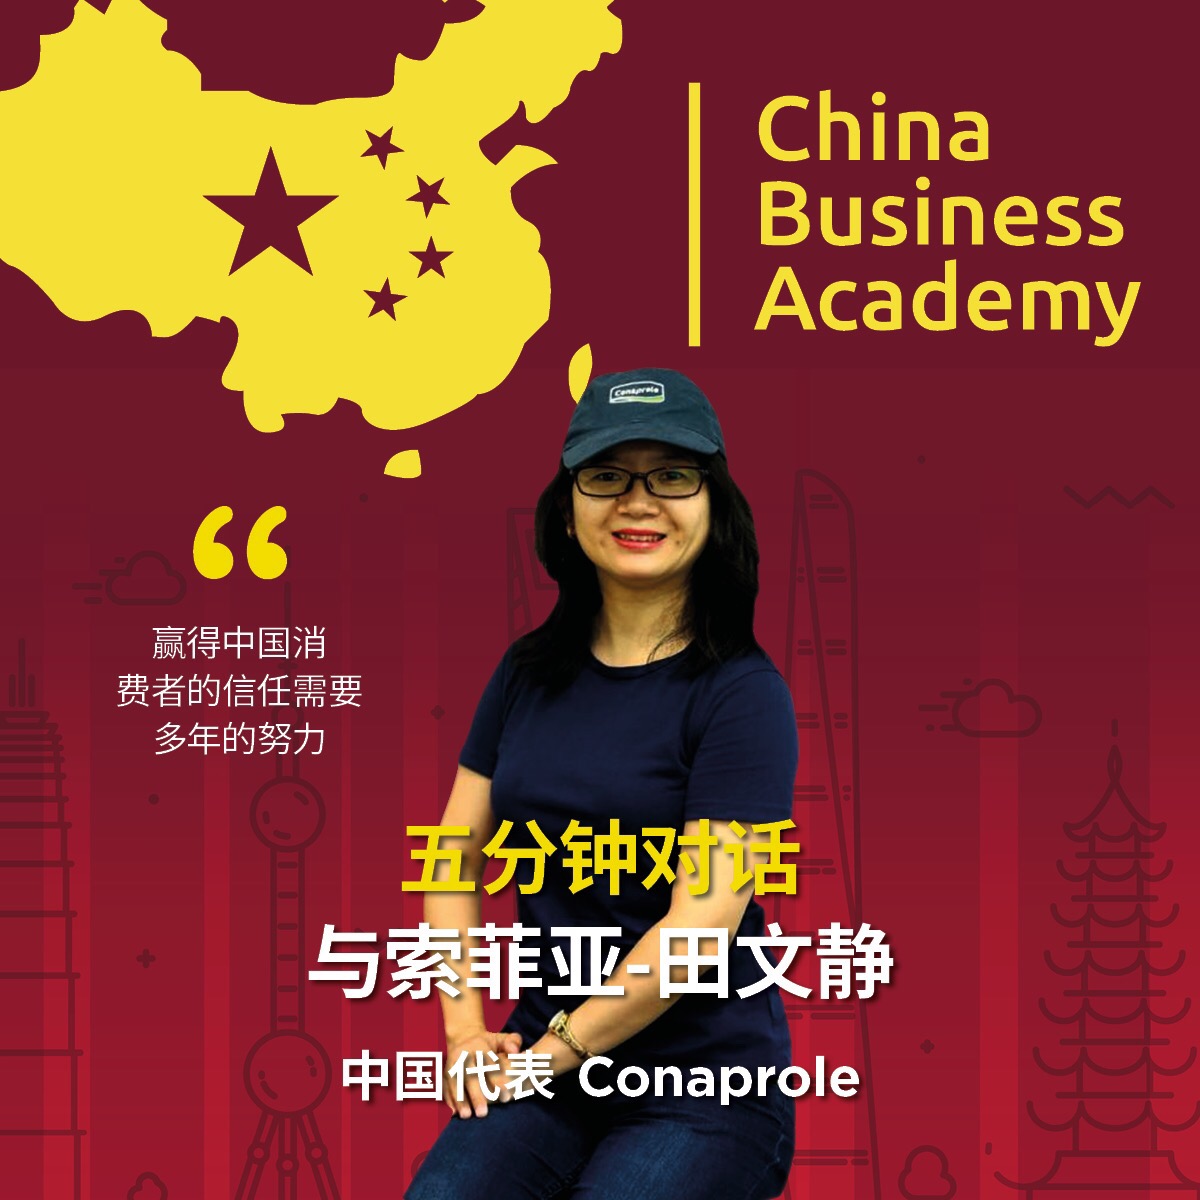 China Business Academy interview with Sofia Wenjing Tian, our Chief Representative in China